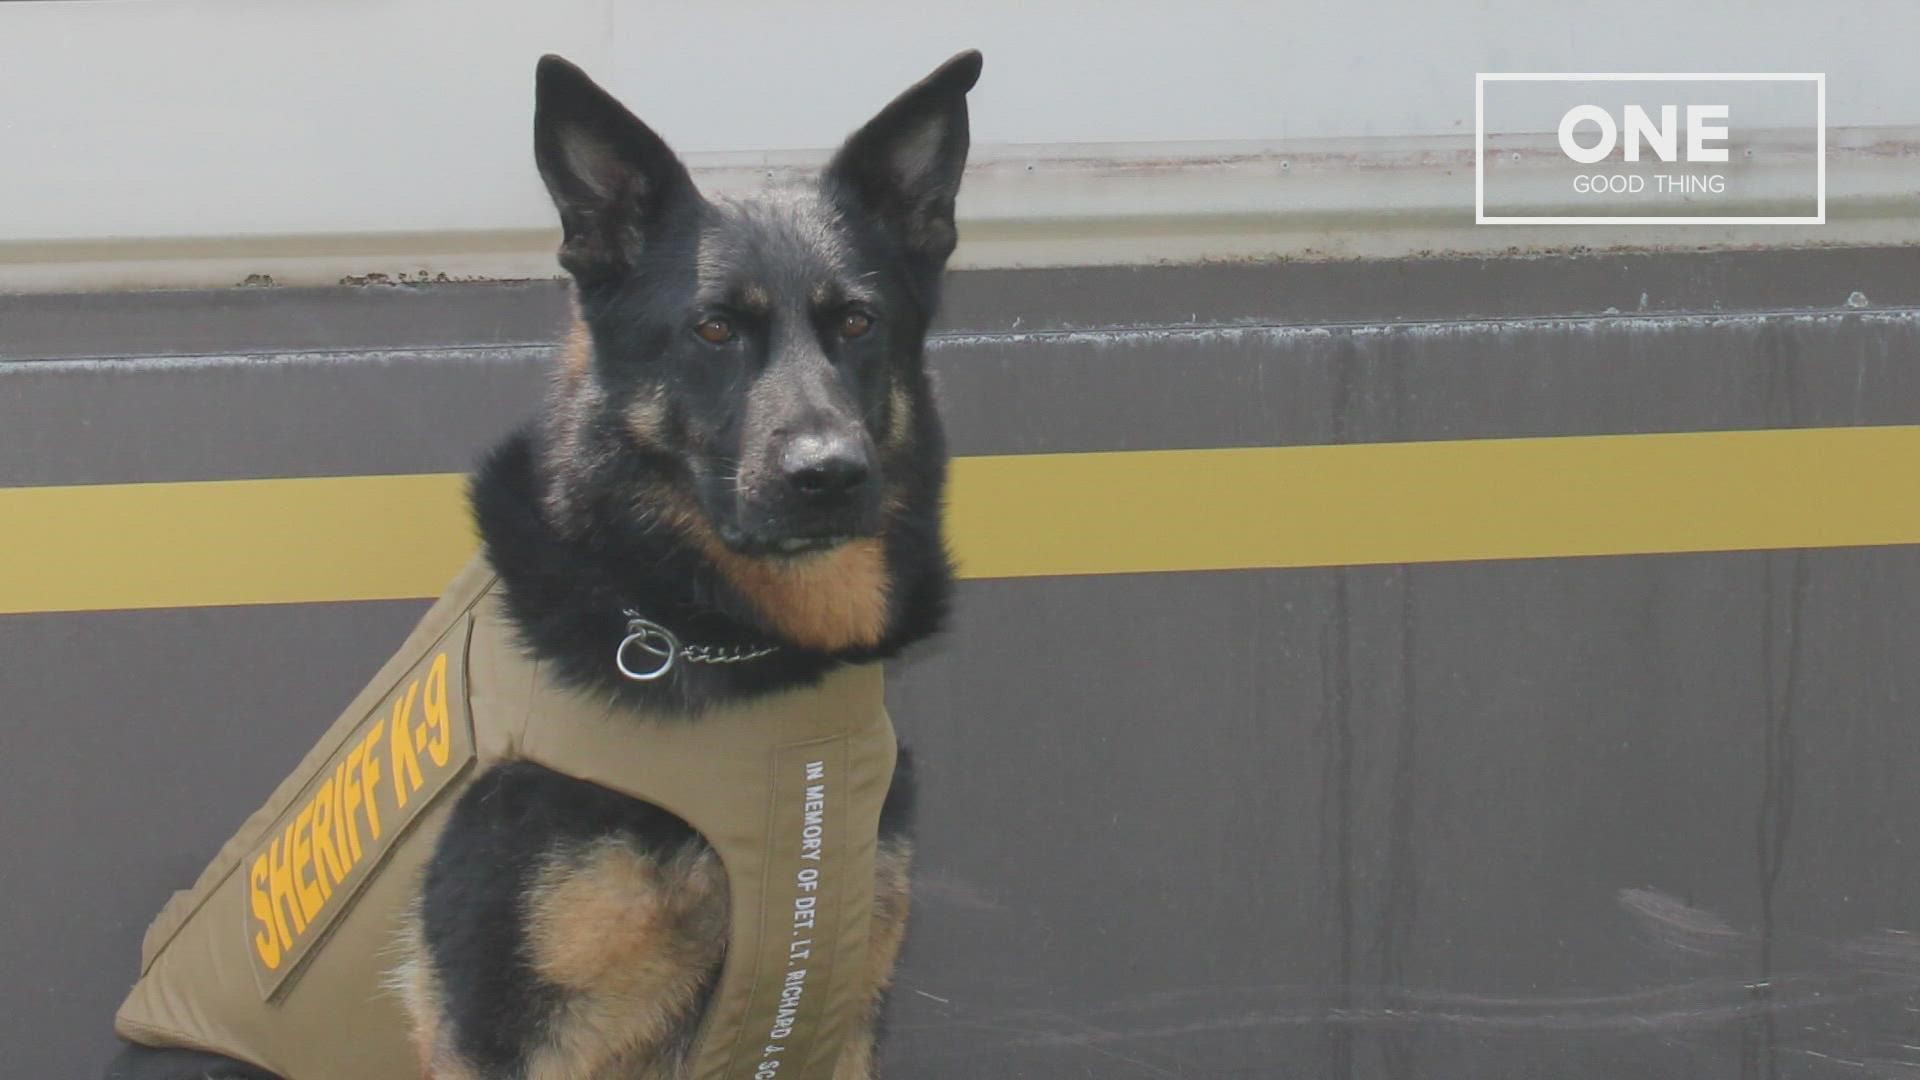 Zeke is a K-9 officer with the Mecosta County Sheriff's Office. He has a new bullet and stab resistant vest thanks to Vested Interest in K-9s.